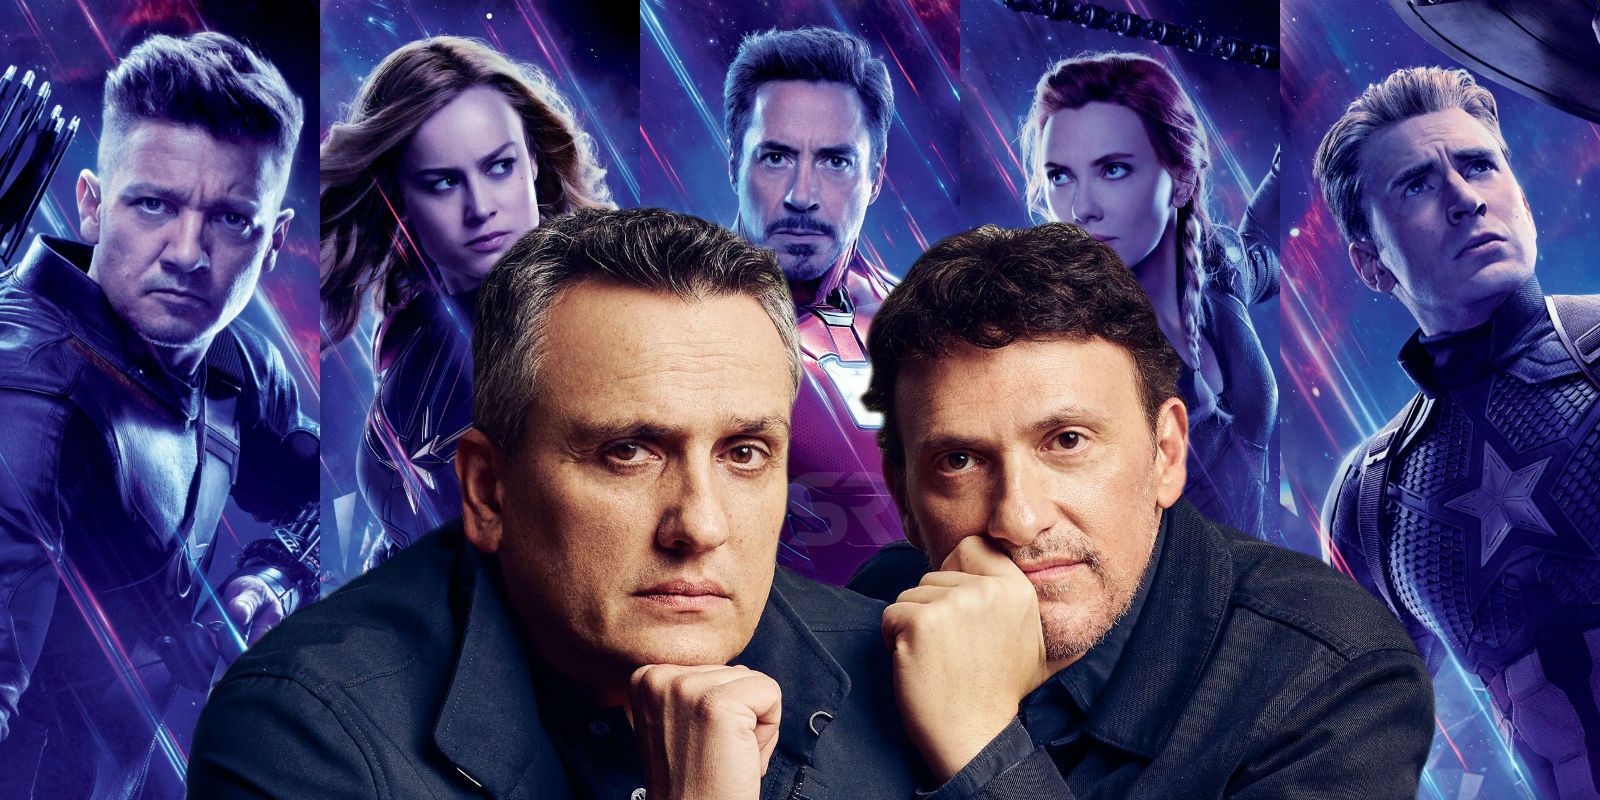 TV Review: Endgame  ***Dave Does the Blog